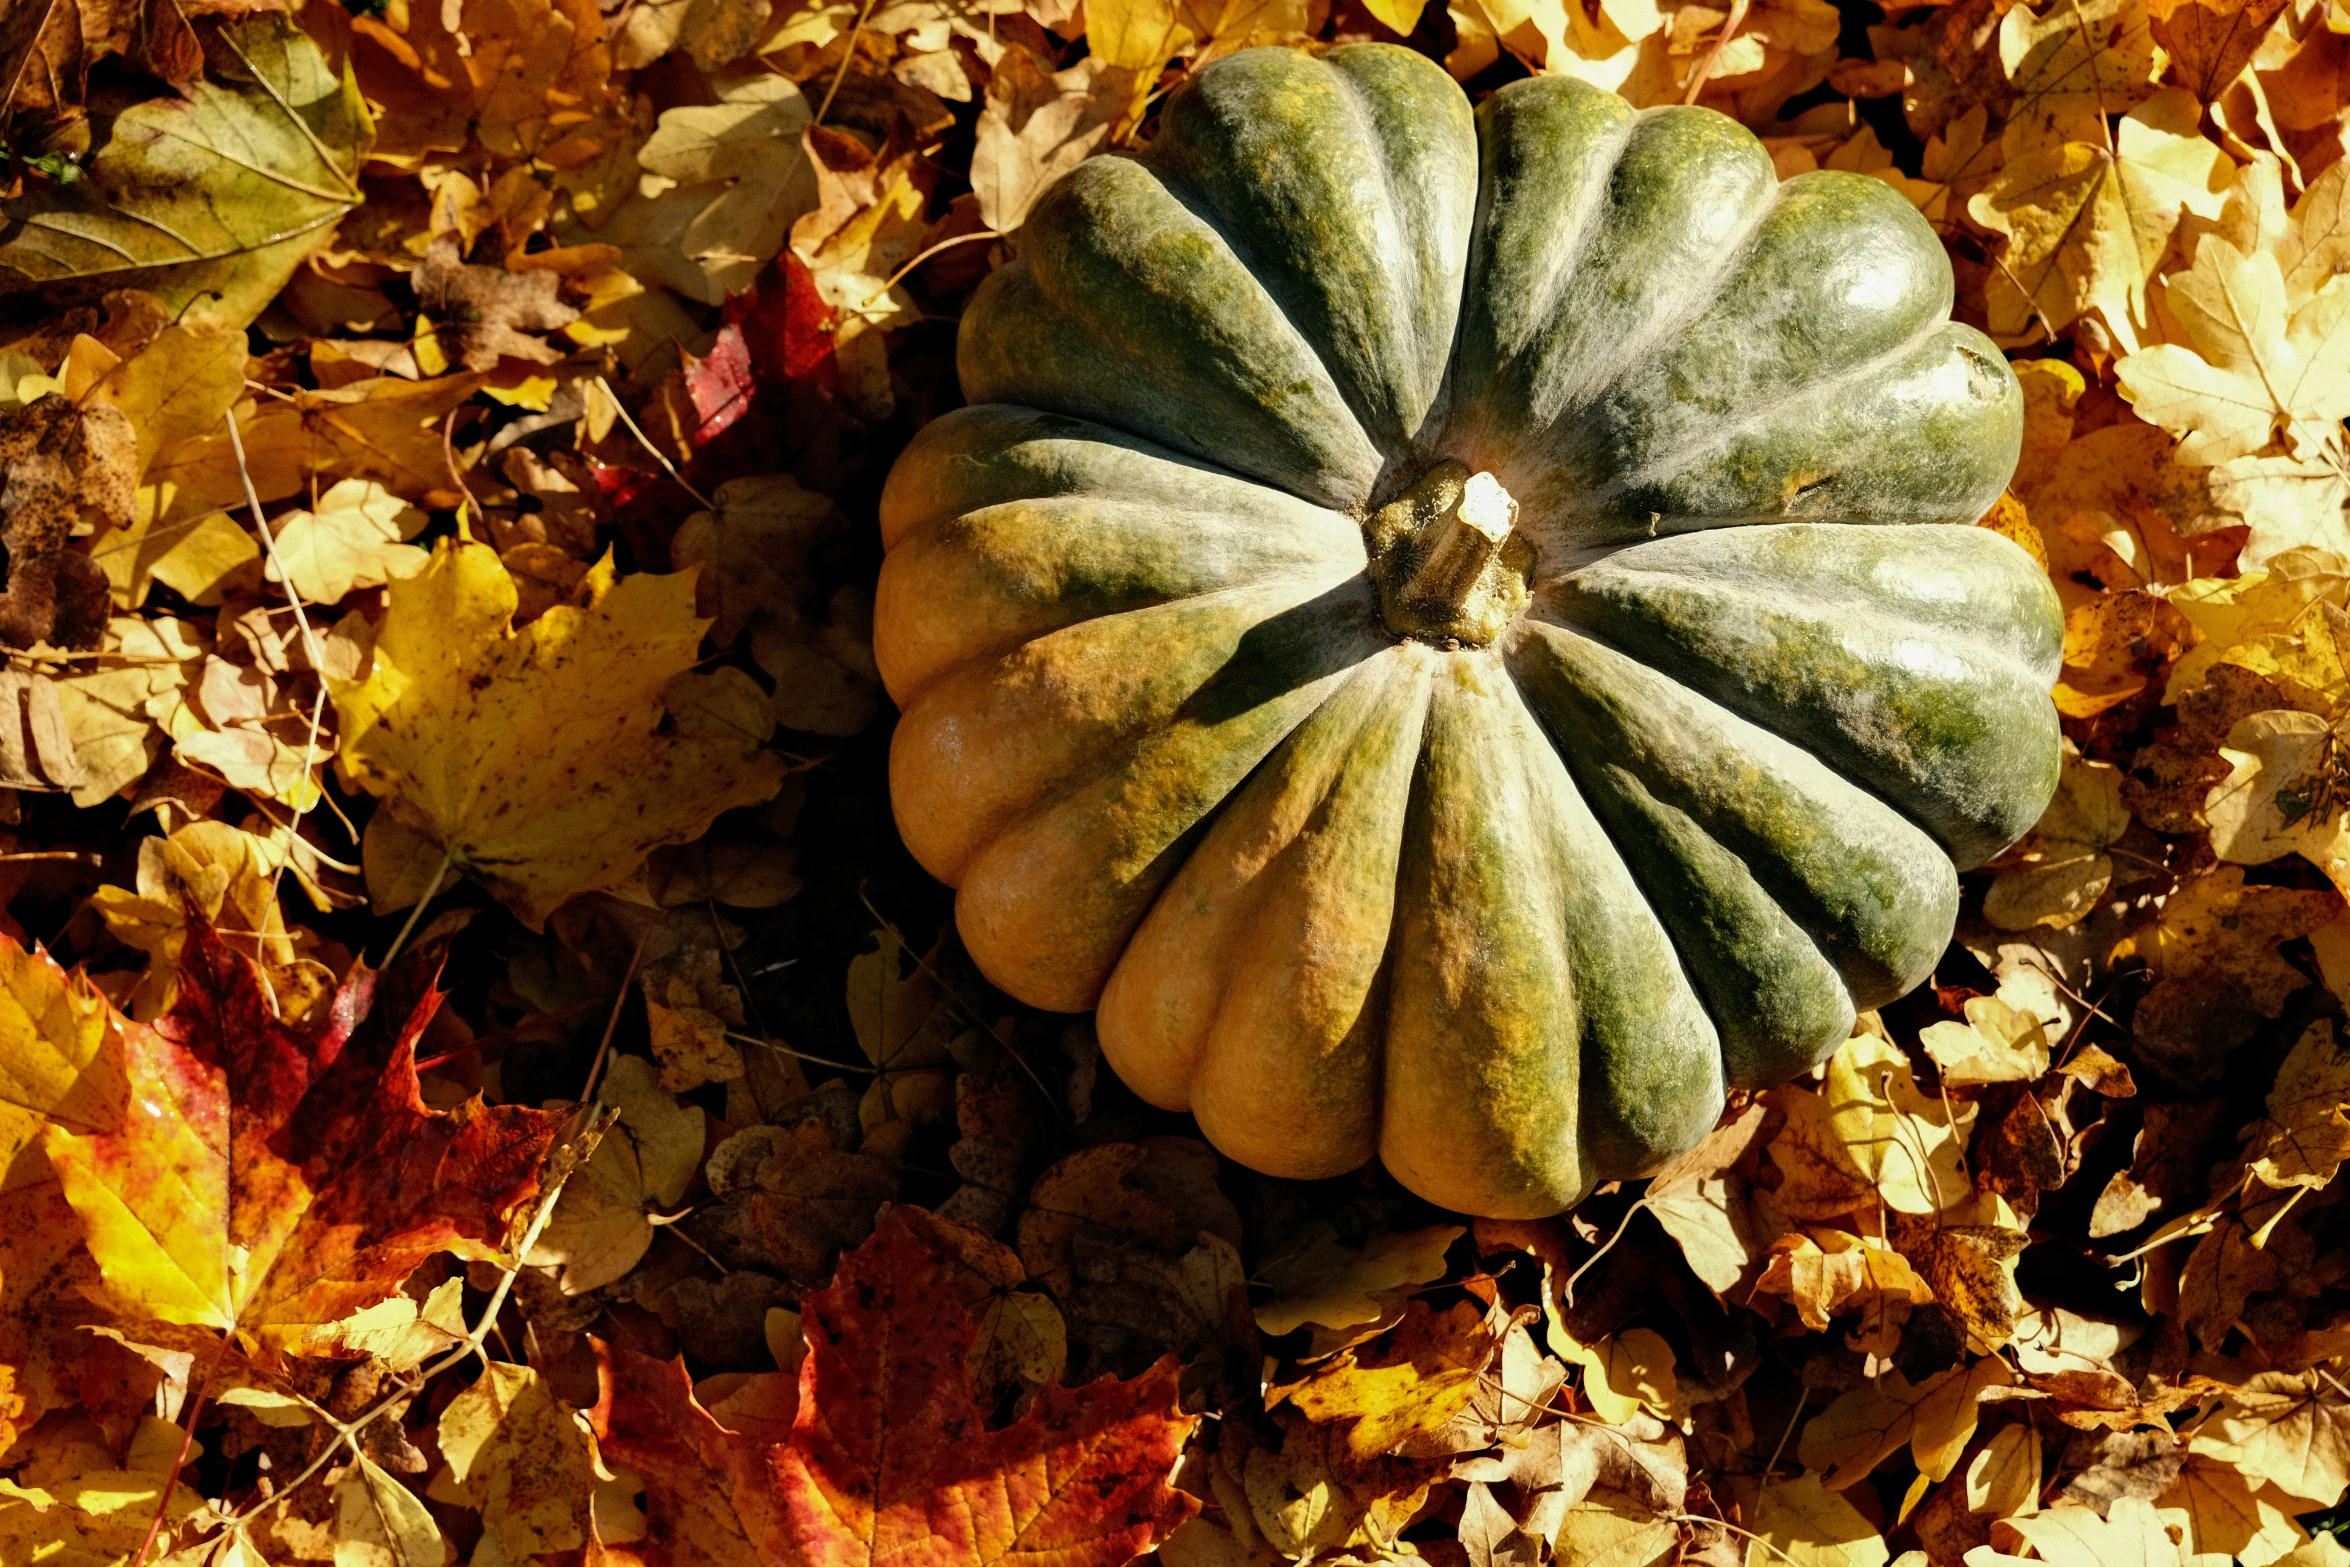 the squash is laying on the ground in leaves